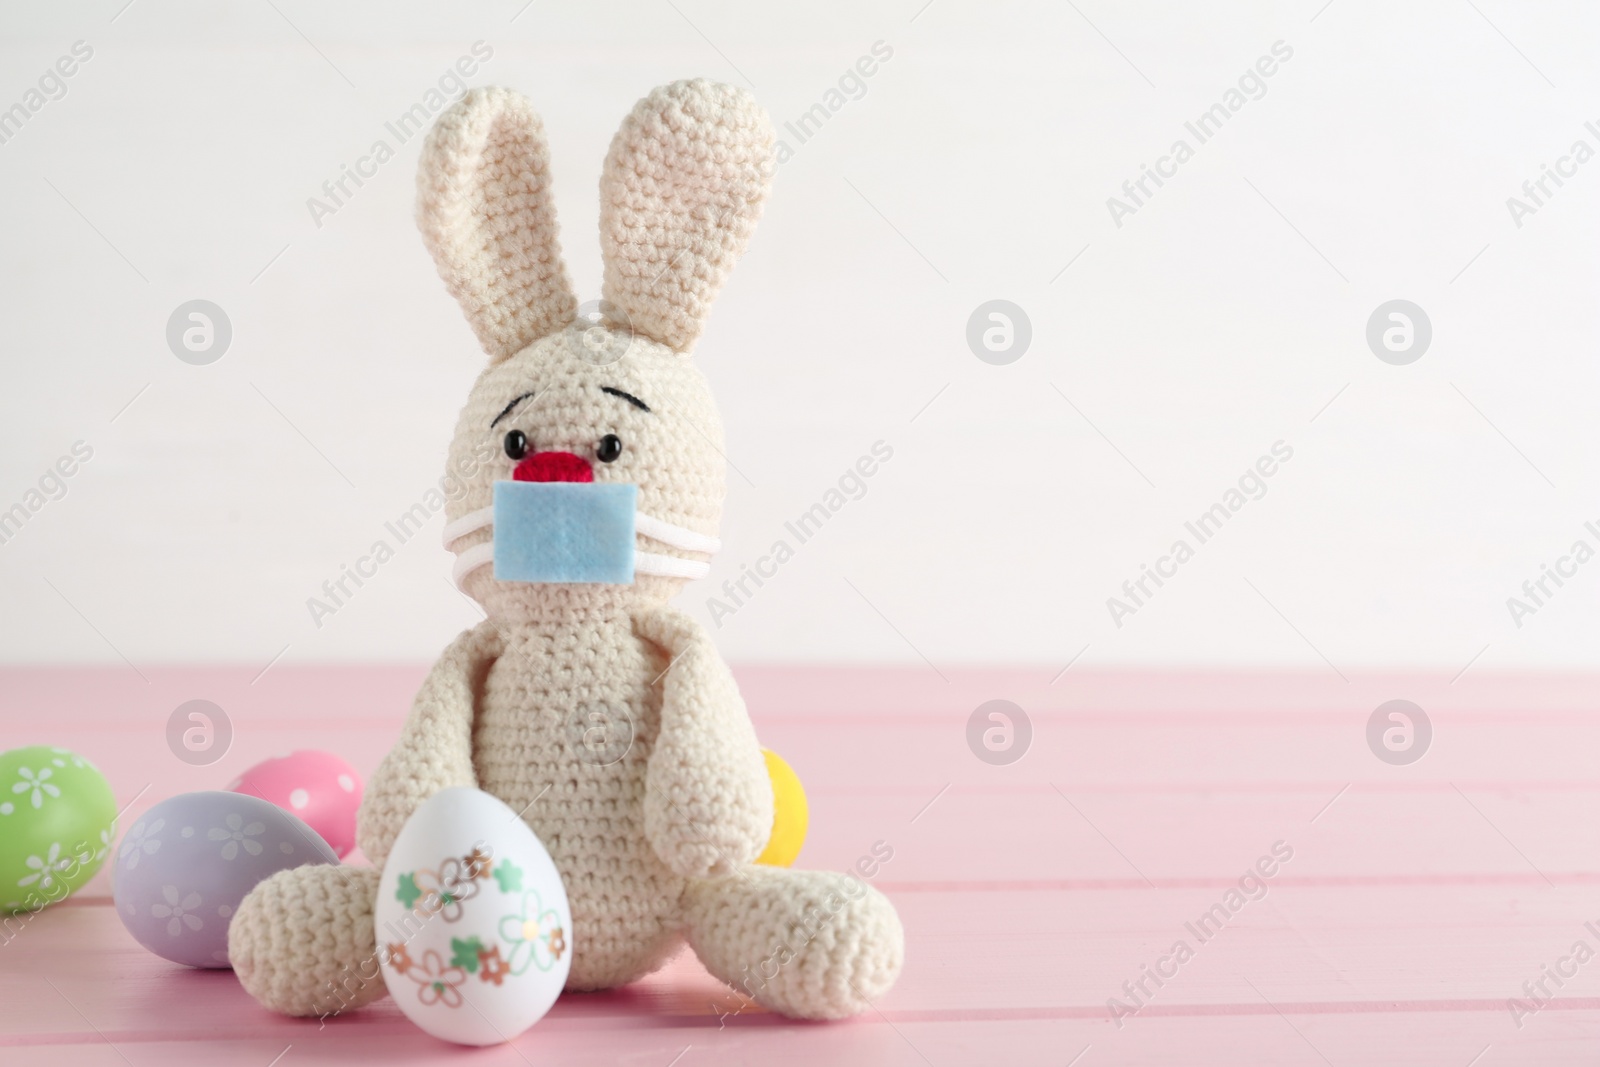 Photo of Toy bunny with protective mask and painted eggs on pink wooden table, space for text. Easter holiday during COVID-19 quarantine